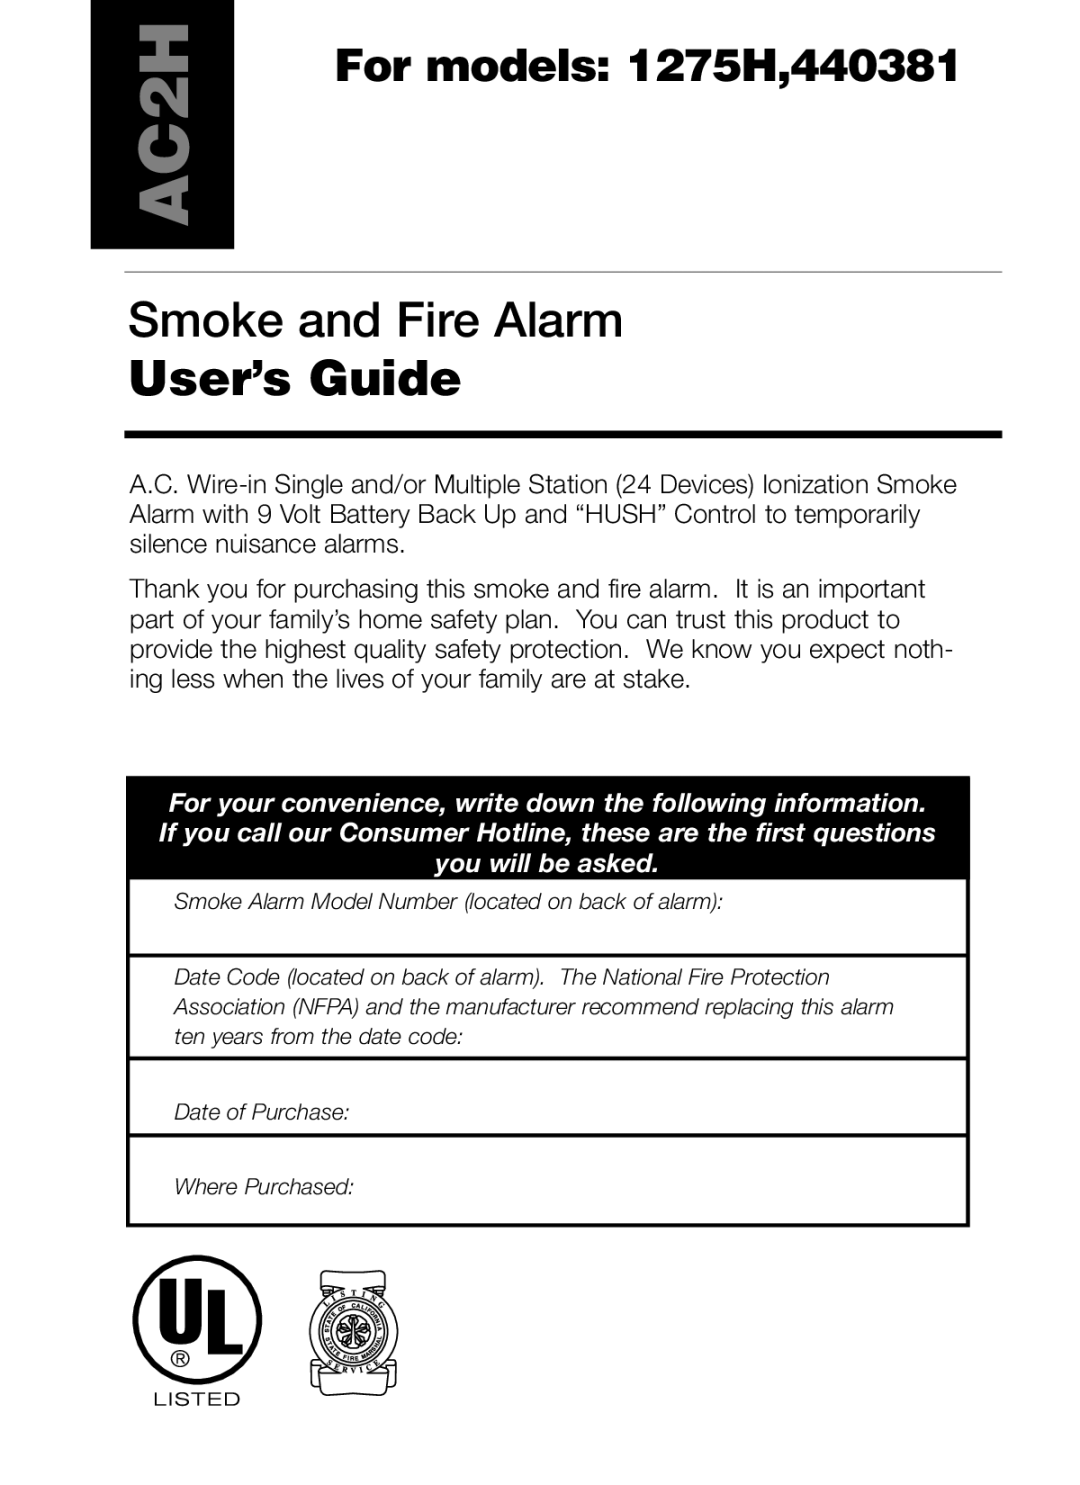 Kidde manual AC2H, Smoke and Fire Alarm, User’s Guide, For models 1275H,440381 